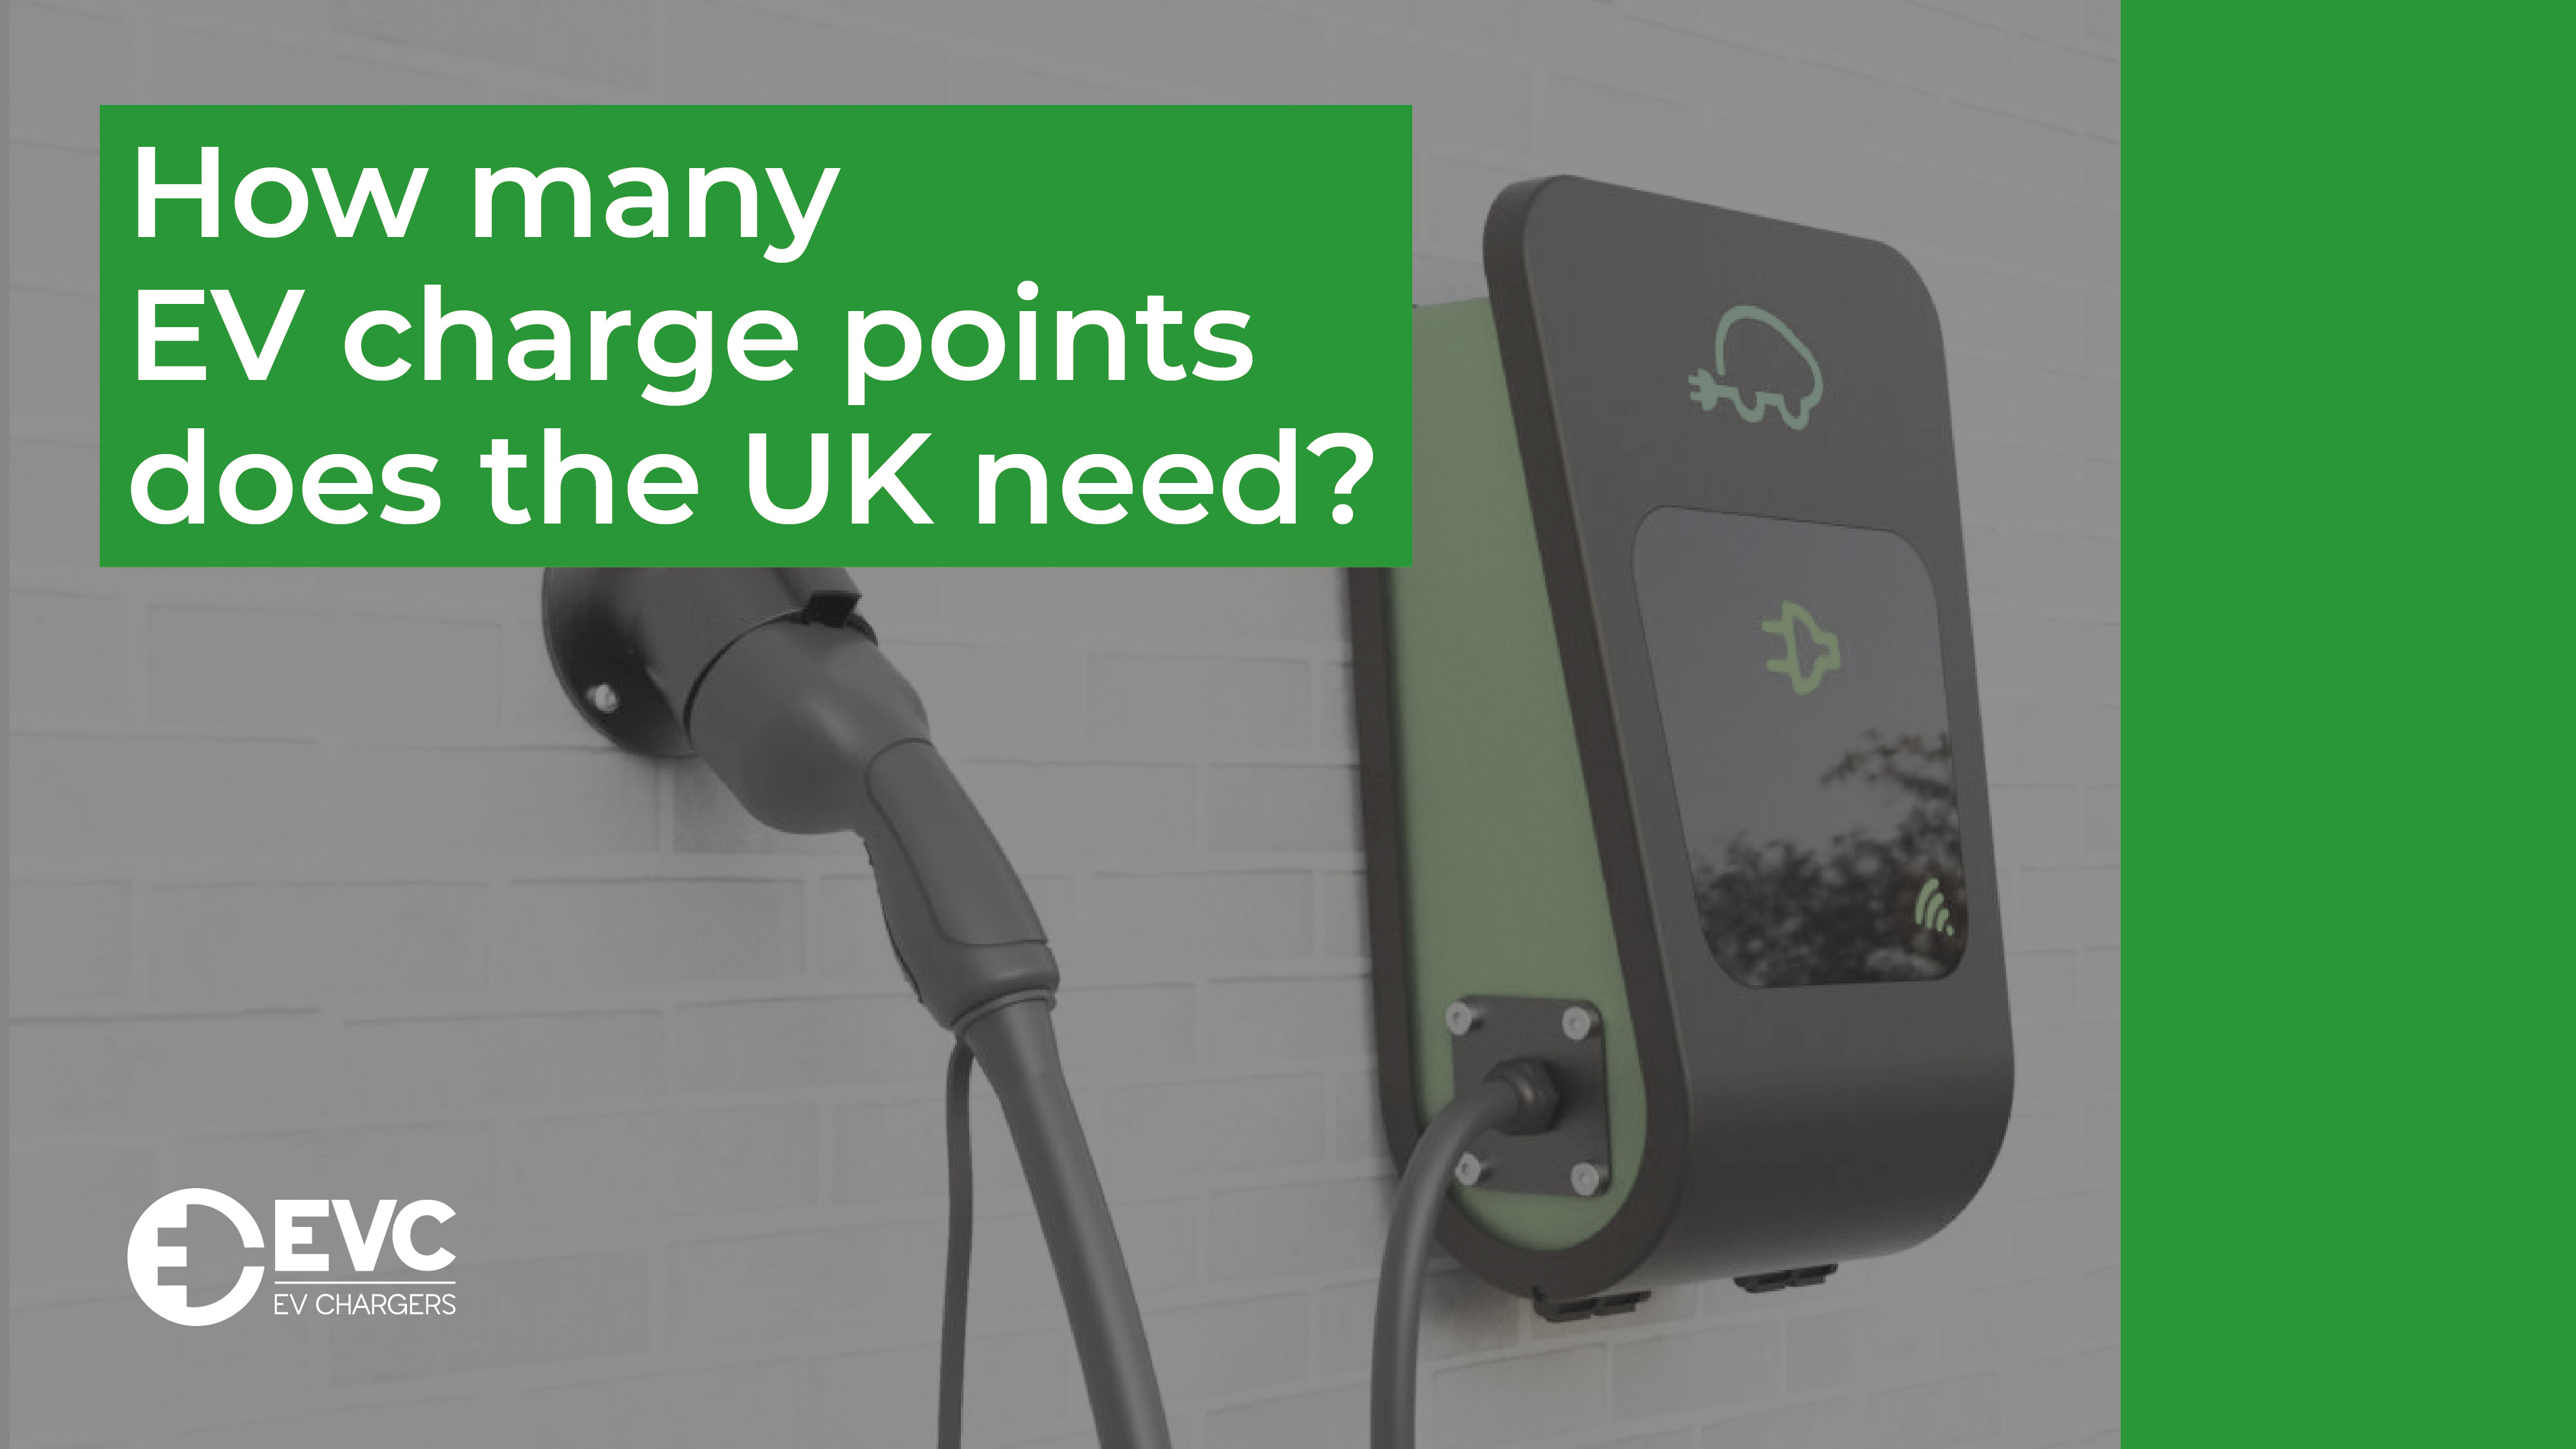 How many EV charge points does the UK need?